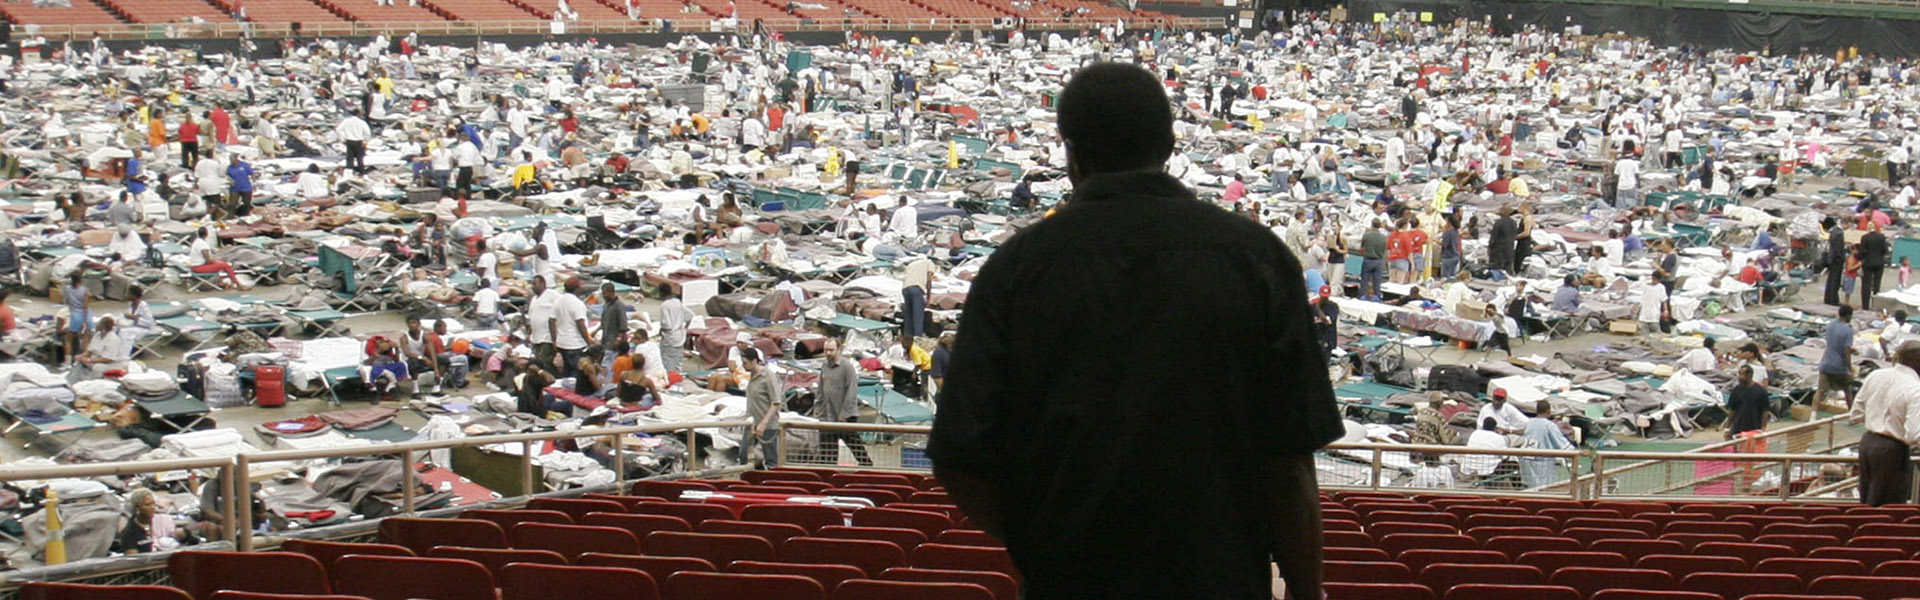 Crowds in a stadium with cots.